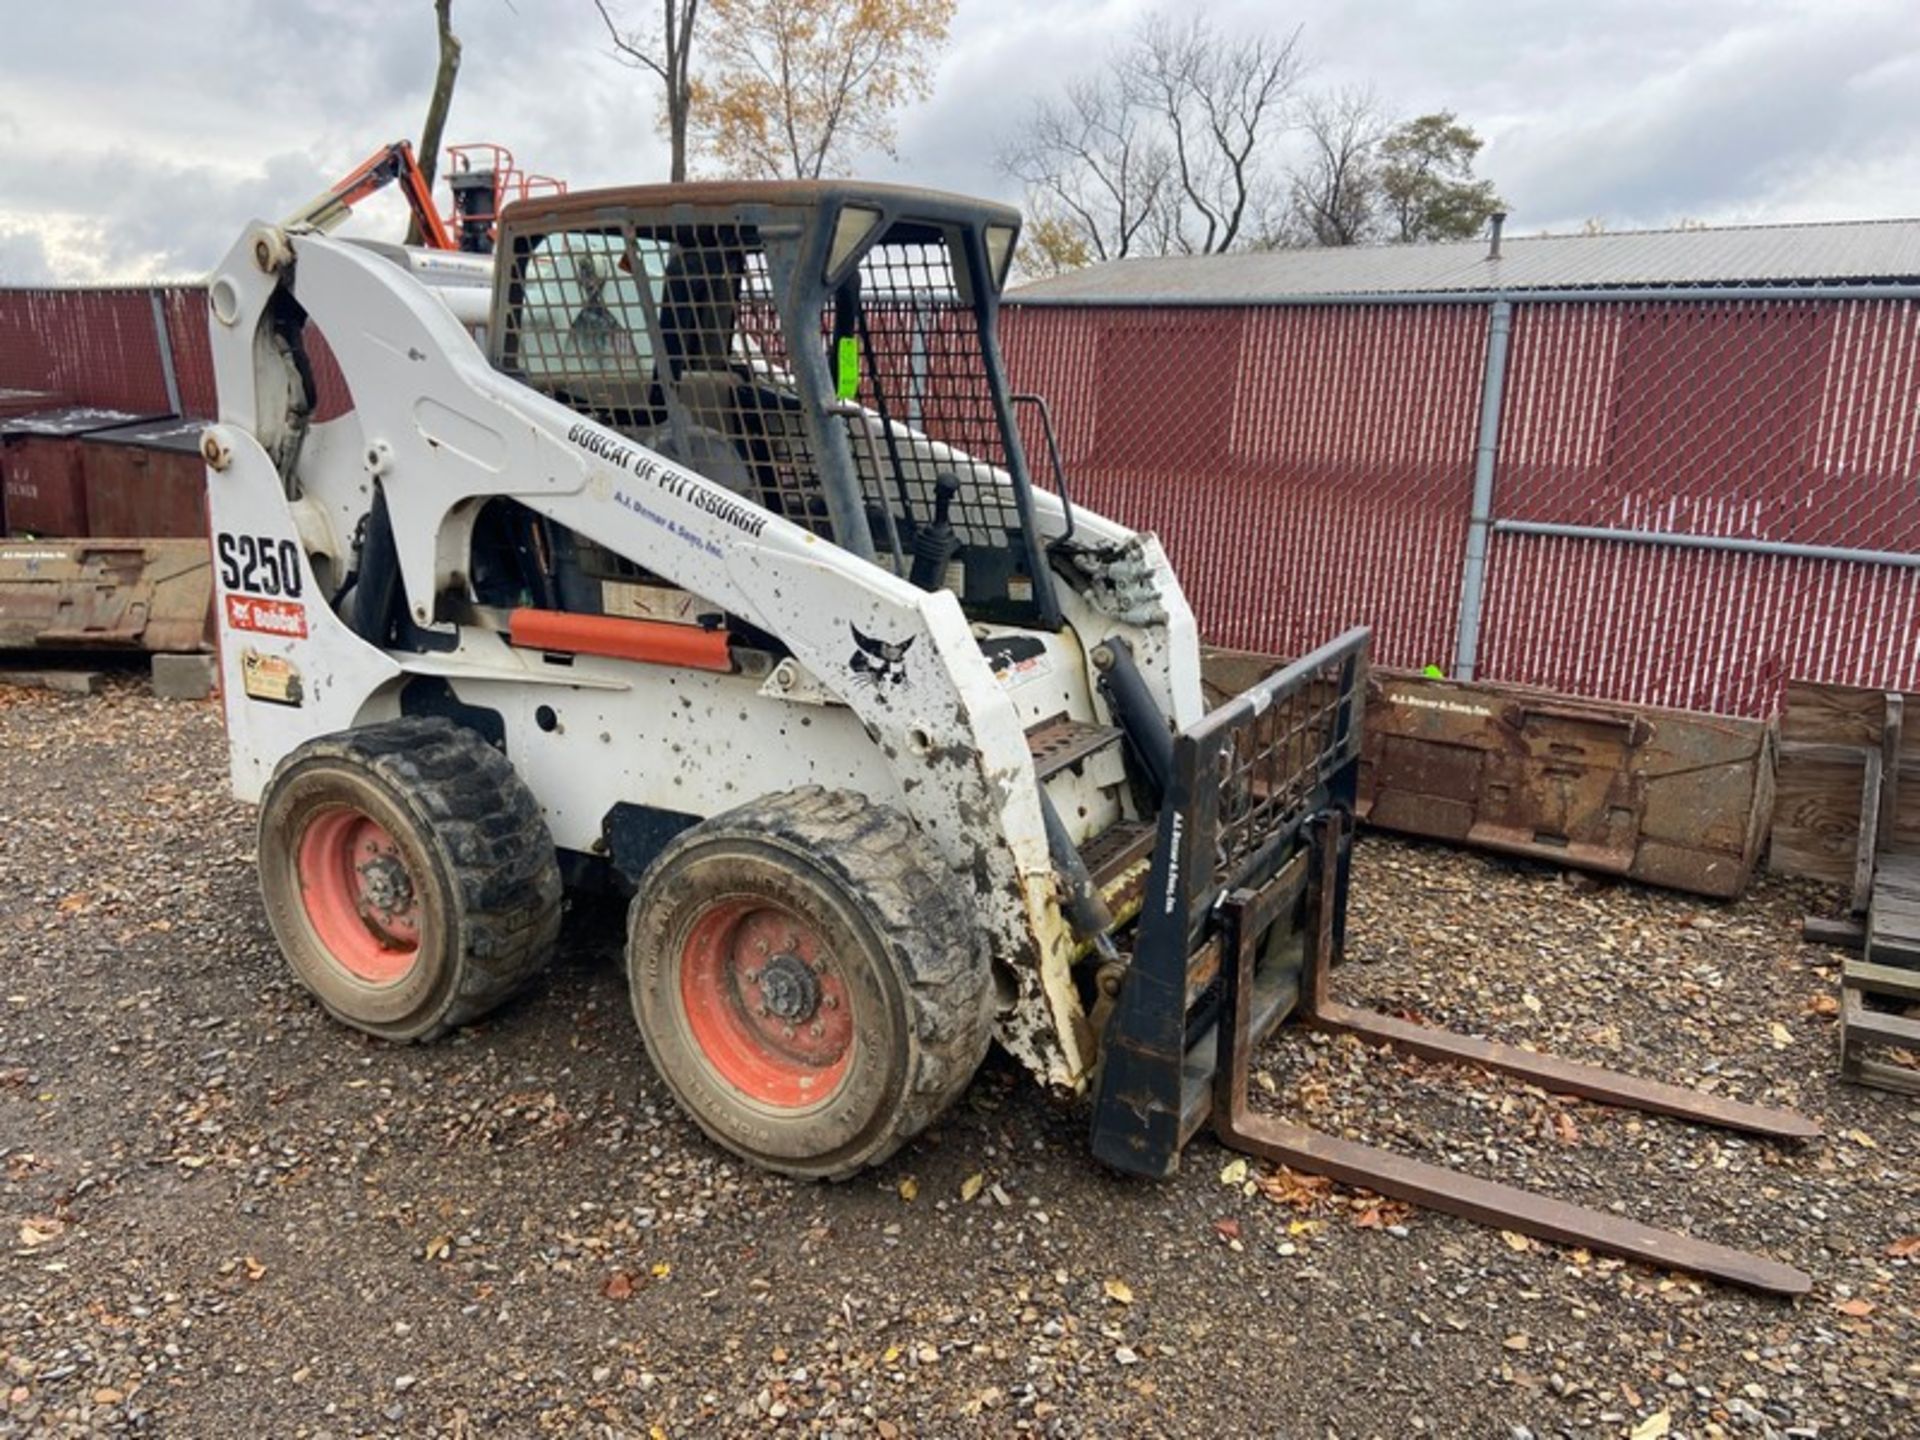 2010 Bobcat S250 Compact Skid Steer, VIN#: A5GM36985, with Fork Attachment (NOTE: DELAYED REMOVAL